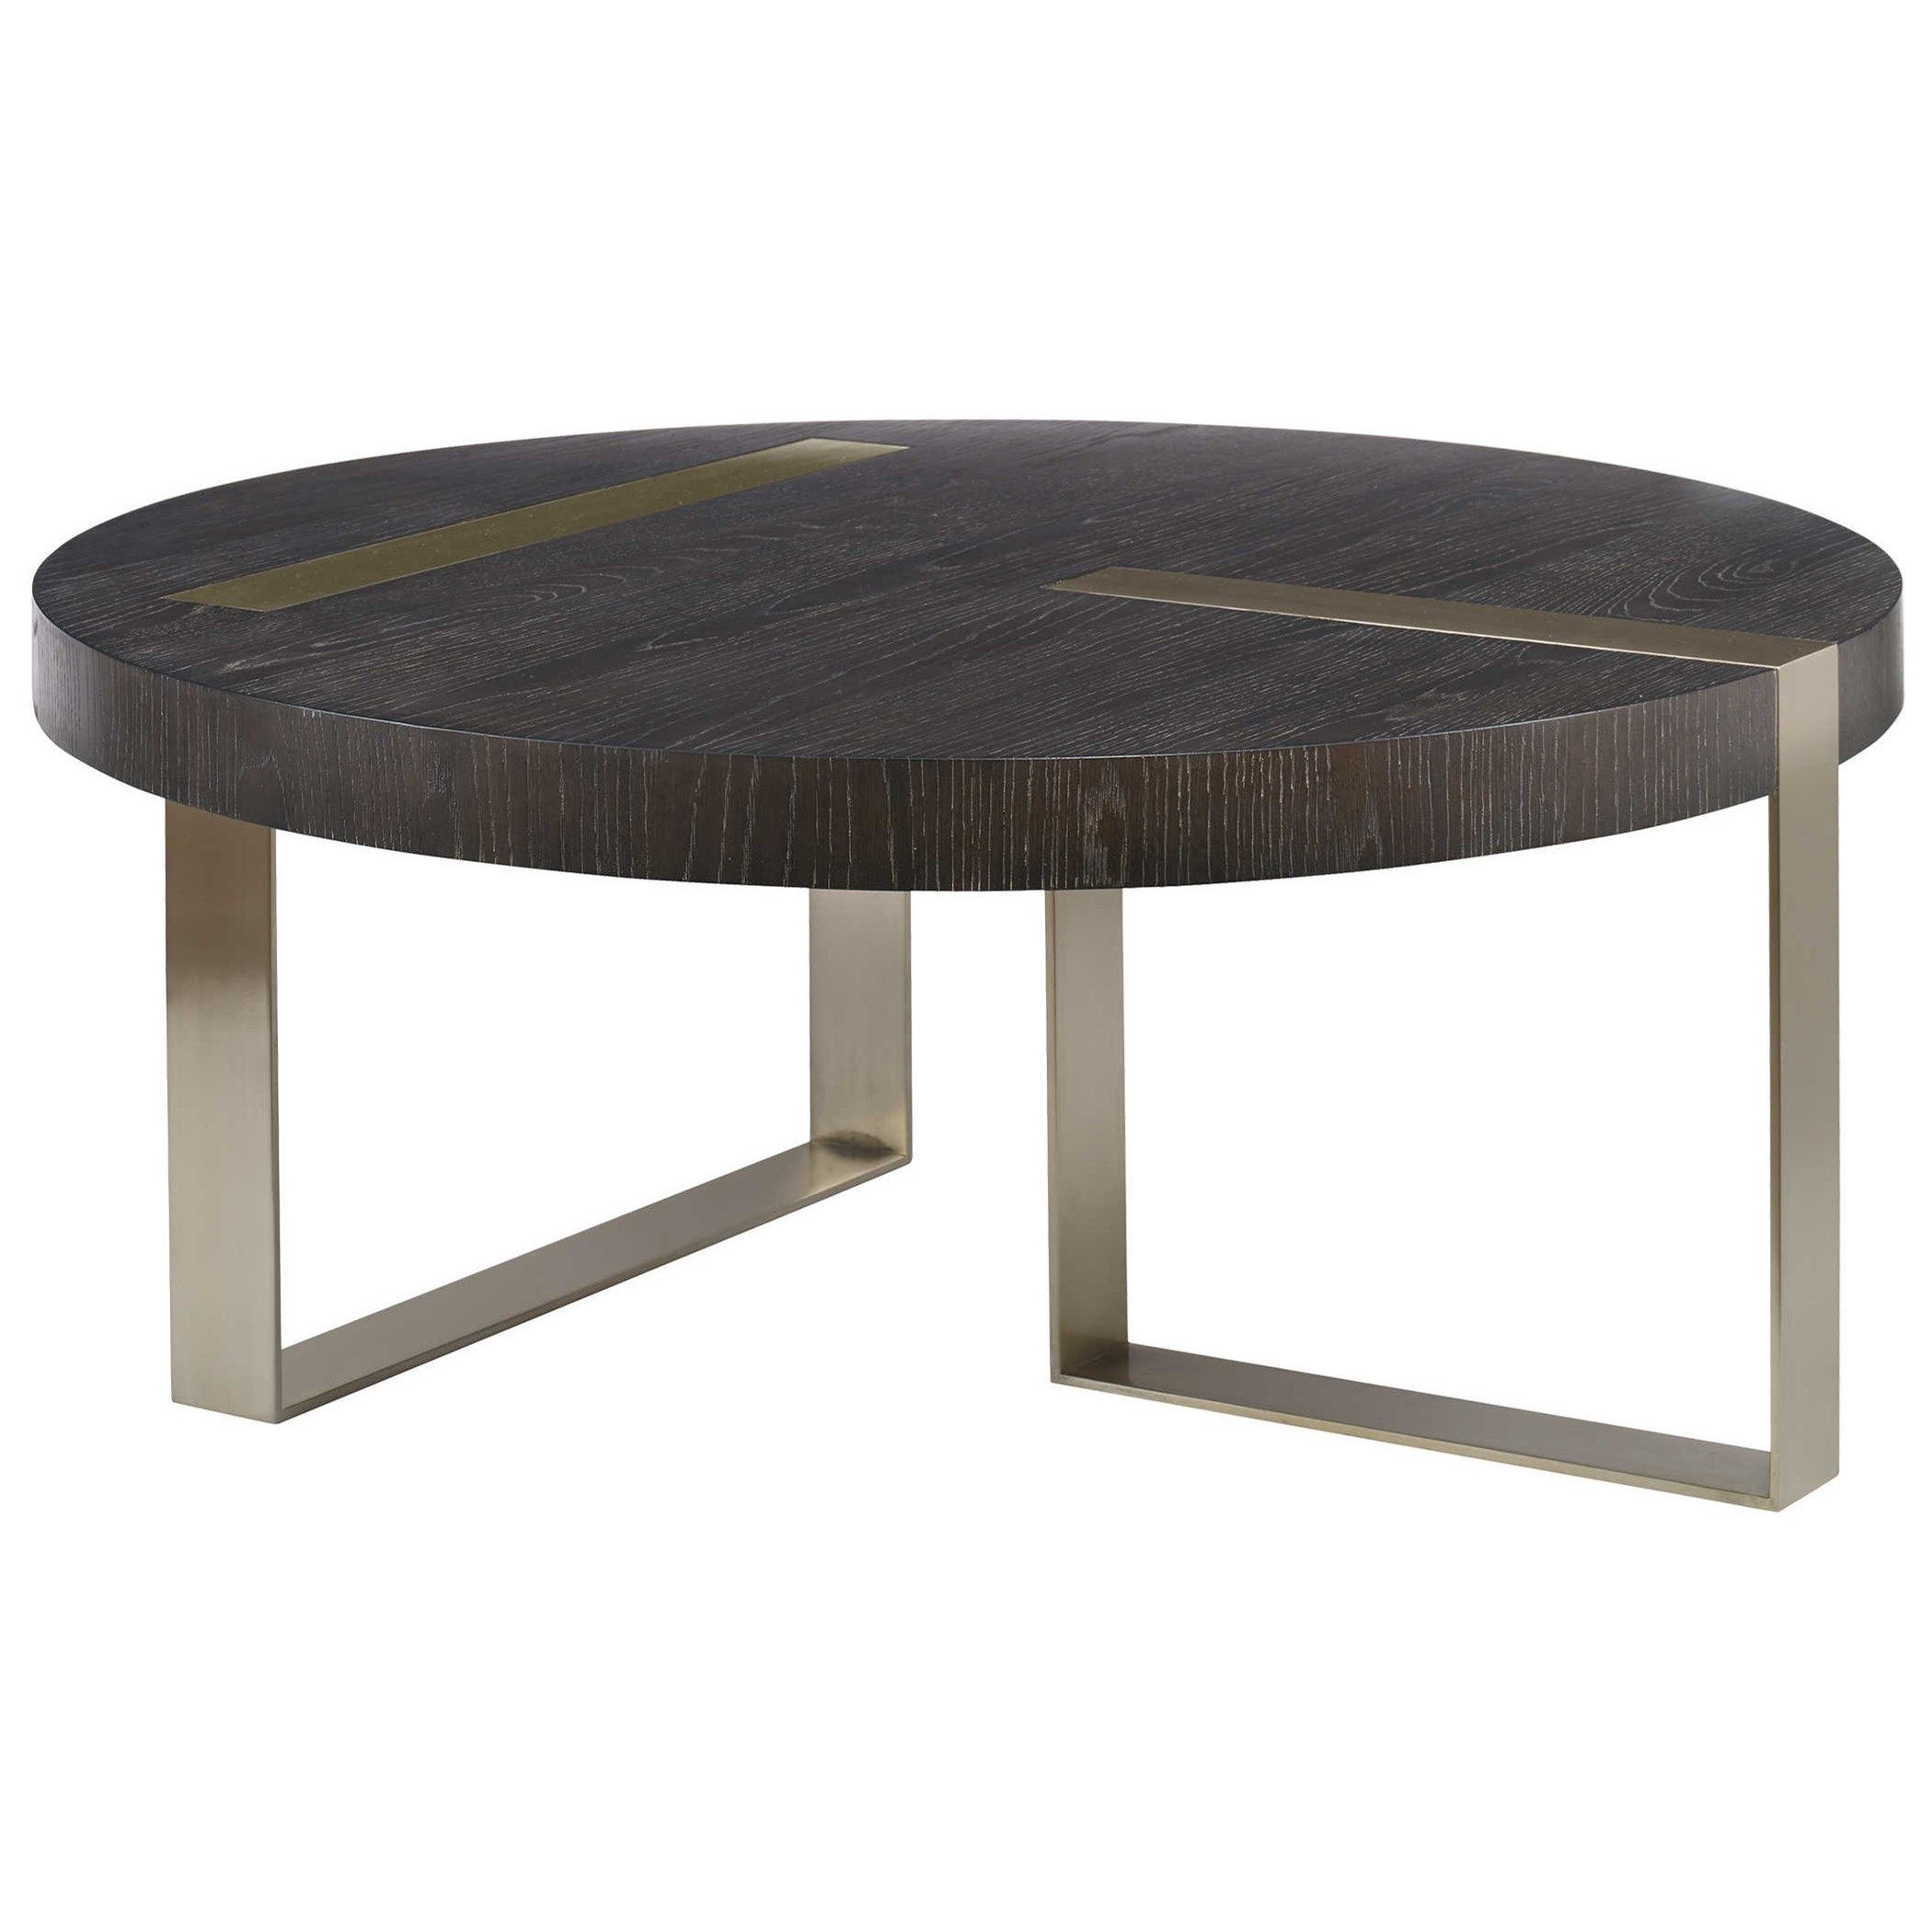 Uttermost Accent Furniture – Occasional Tables Converge Round Coffee Within Occasional Coffee Tables (View 7 of 15)